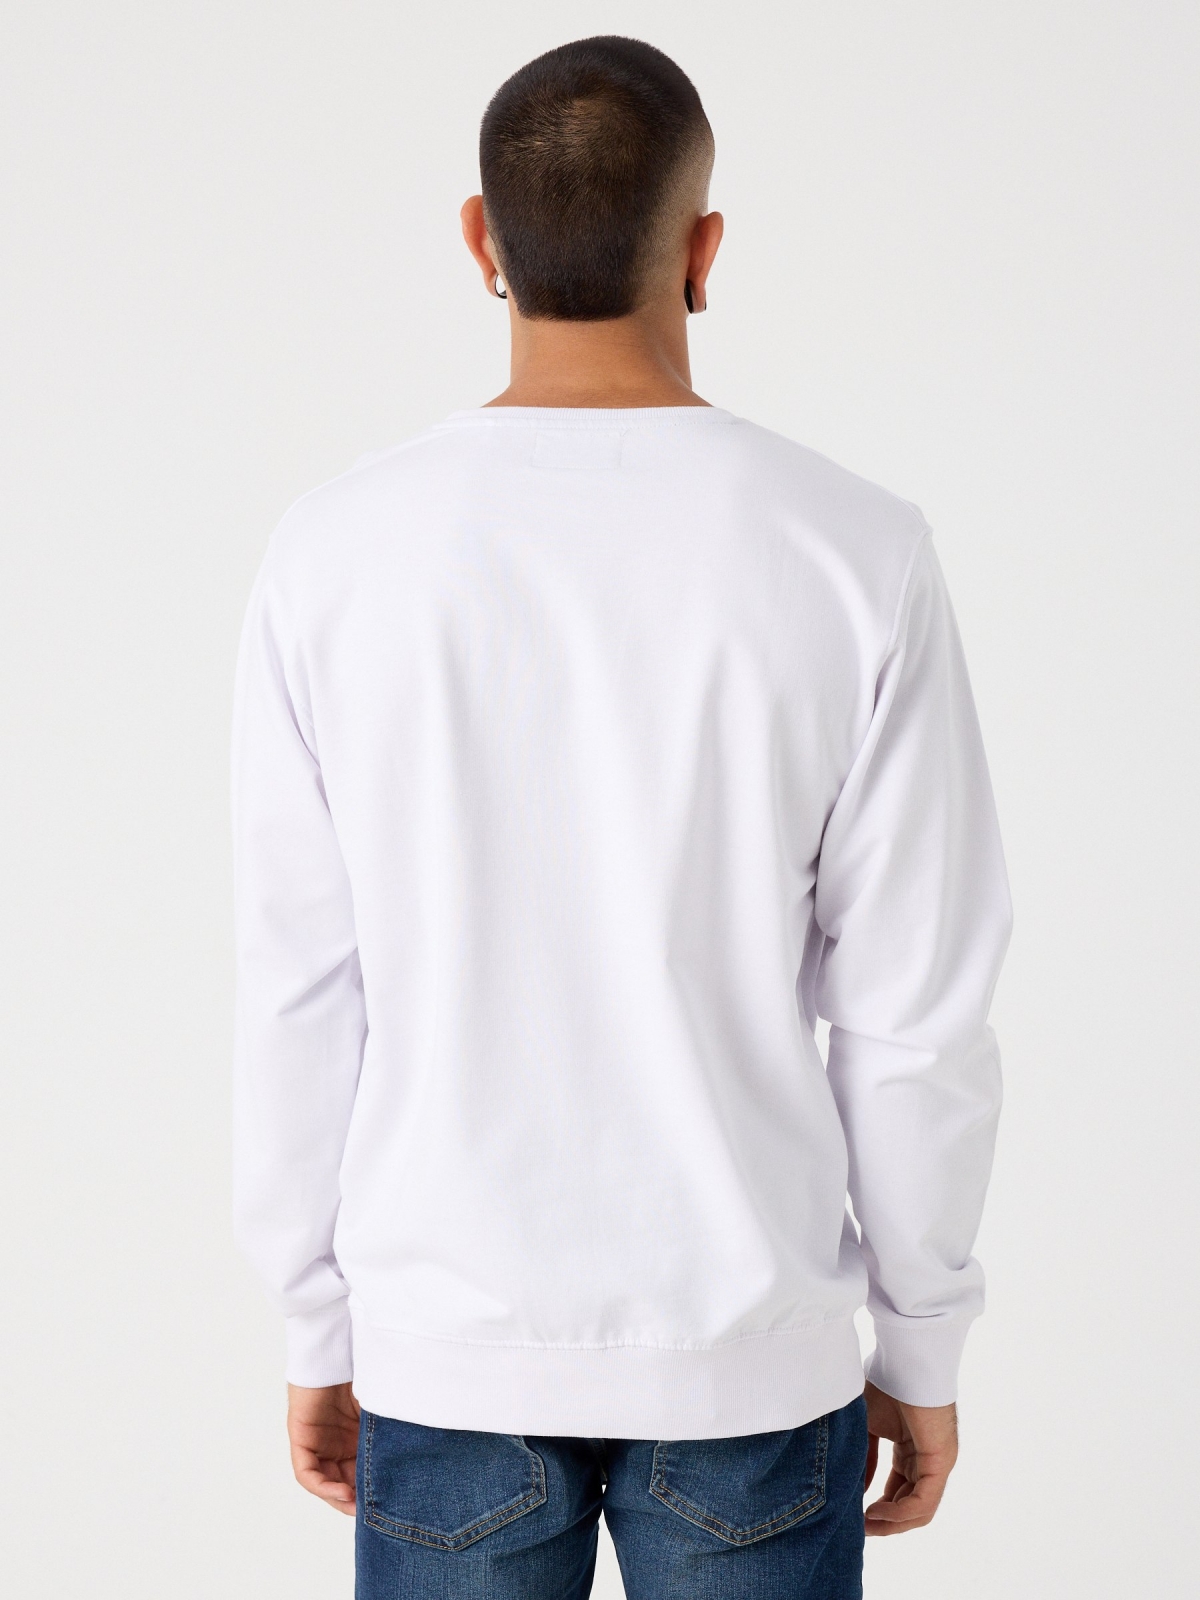 Hoodless sweatshirt with logo white middle back view